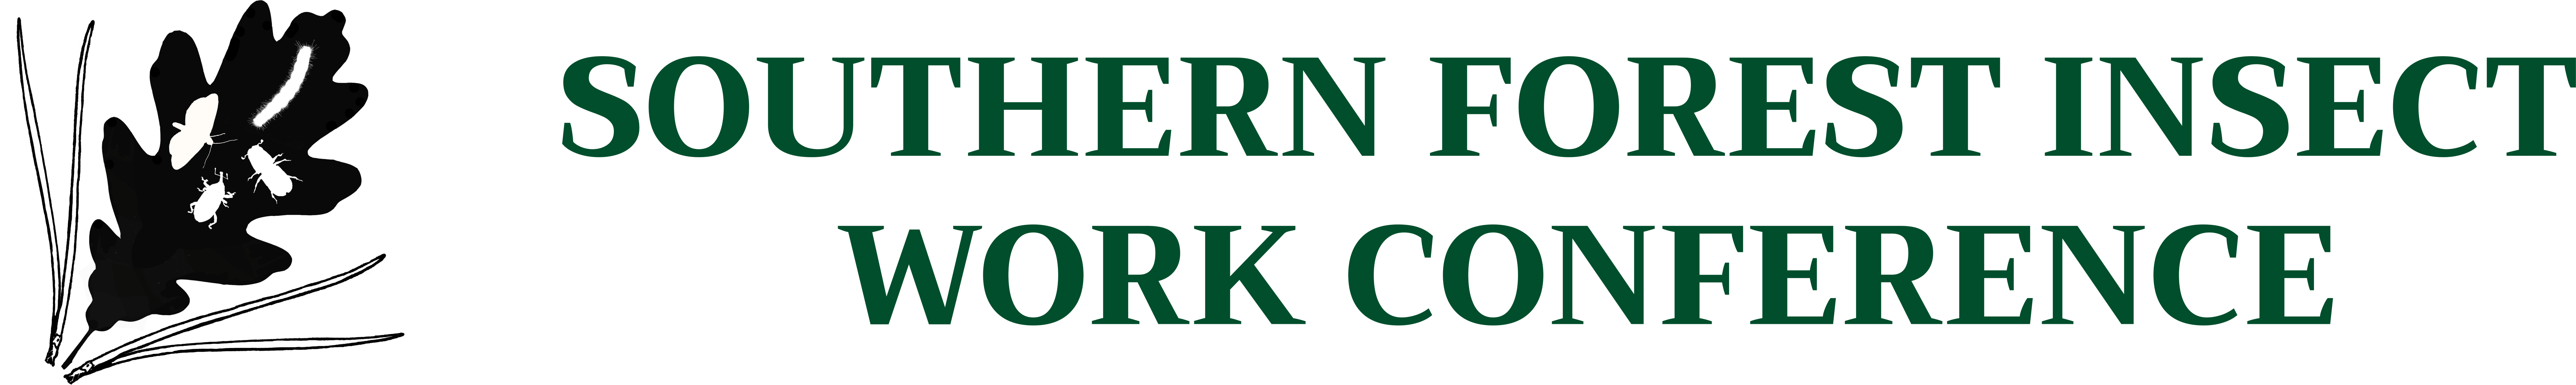 SFIWC logo: On the left is a black leaf flanked on the left and right by outlines of pine needles. On the black leaf are solid white insects. Across the center and right are the words "southern Forest Insect Work Conference" in dark green text, in all caps. Links to the homepage.